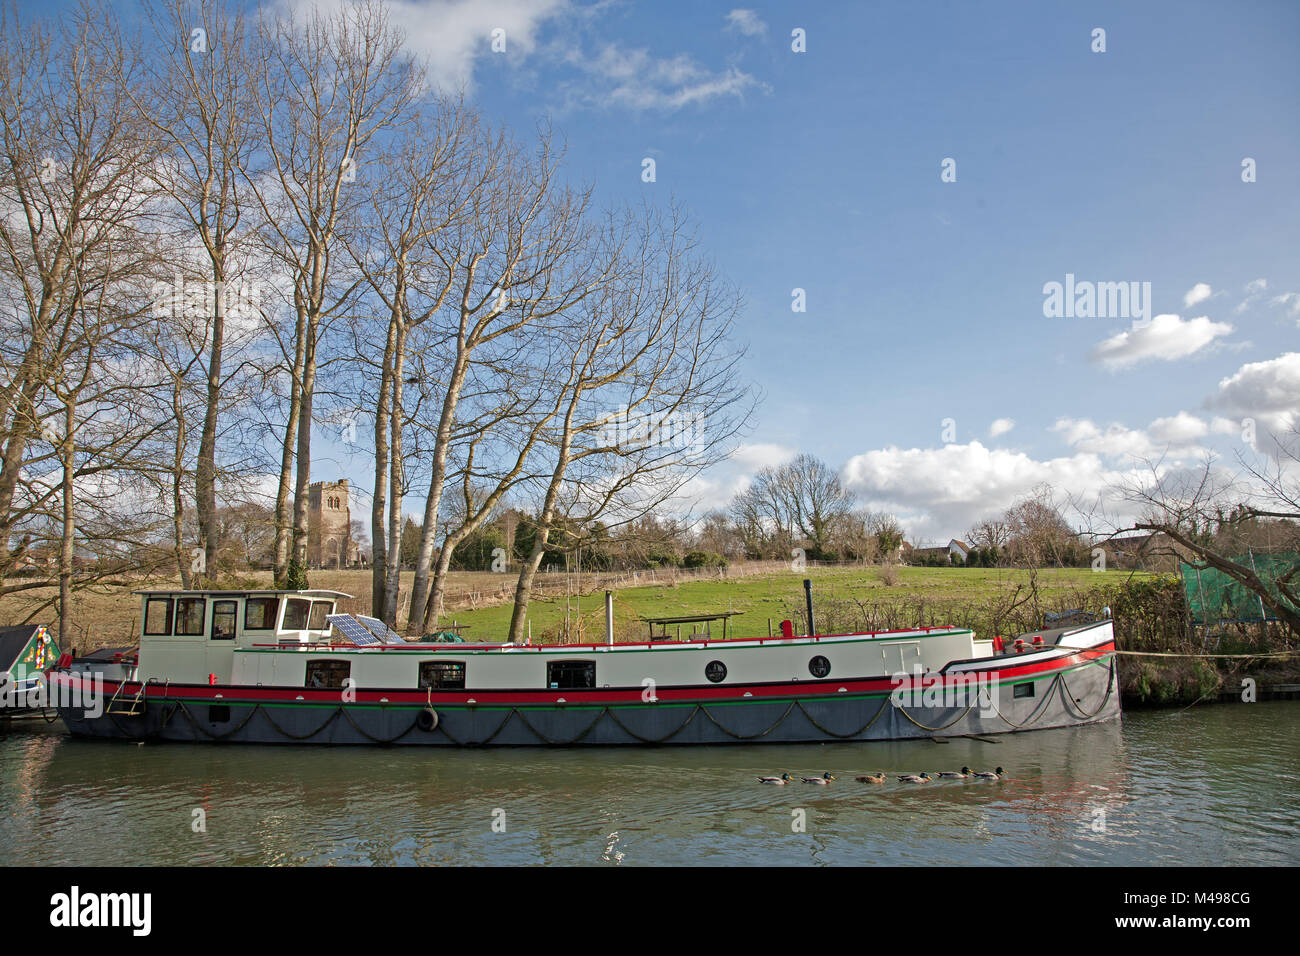 Large barge moored on the Grand Union Canal at Marsworth, Tring, UK., with All Saints Church in the background and mallard ducks in the foreground. Stock Photo